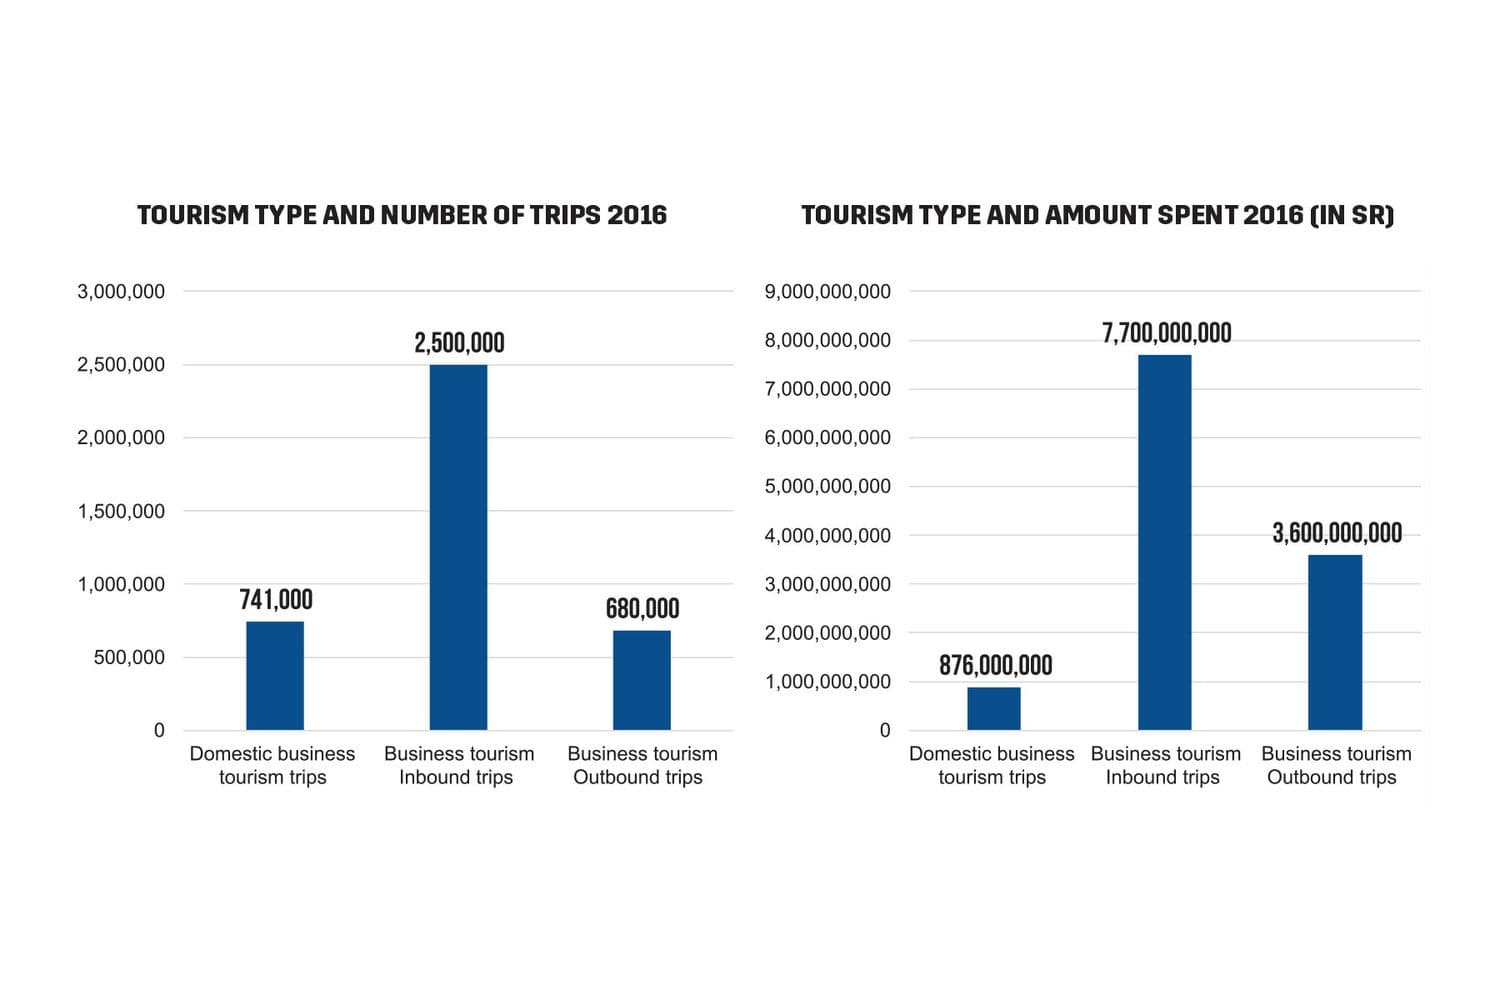 Tourism type and number of trips 2016